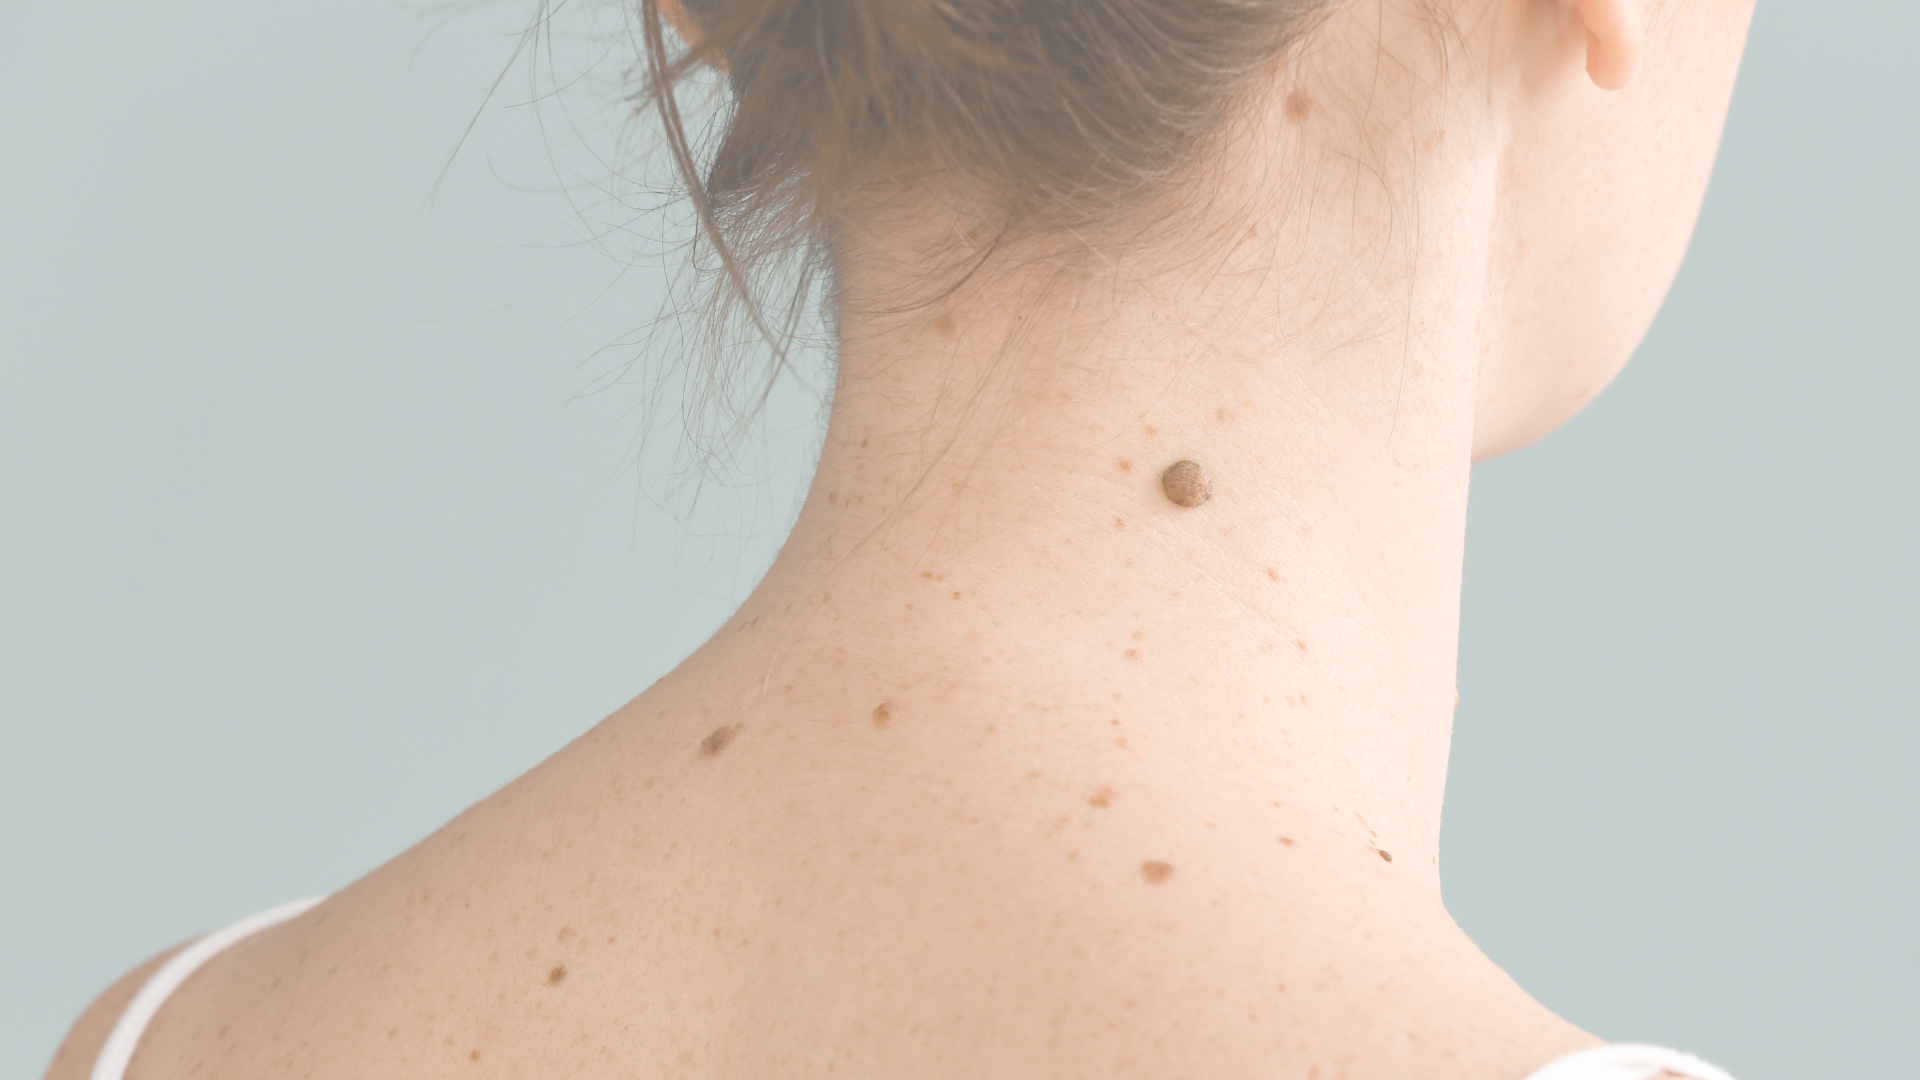 Redheads, This Could Save Your Life: Know The Signs of Melanoma